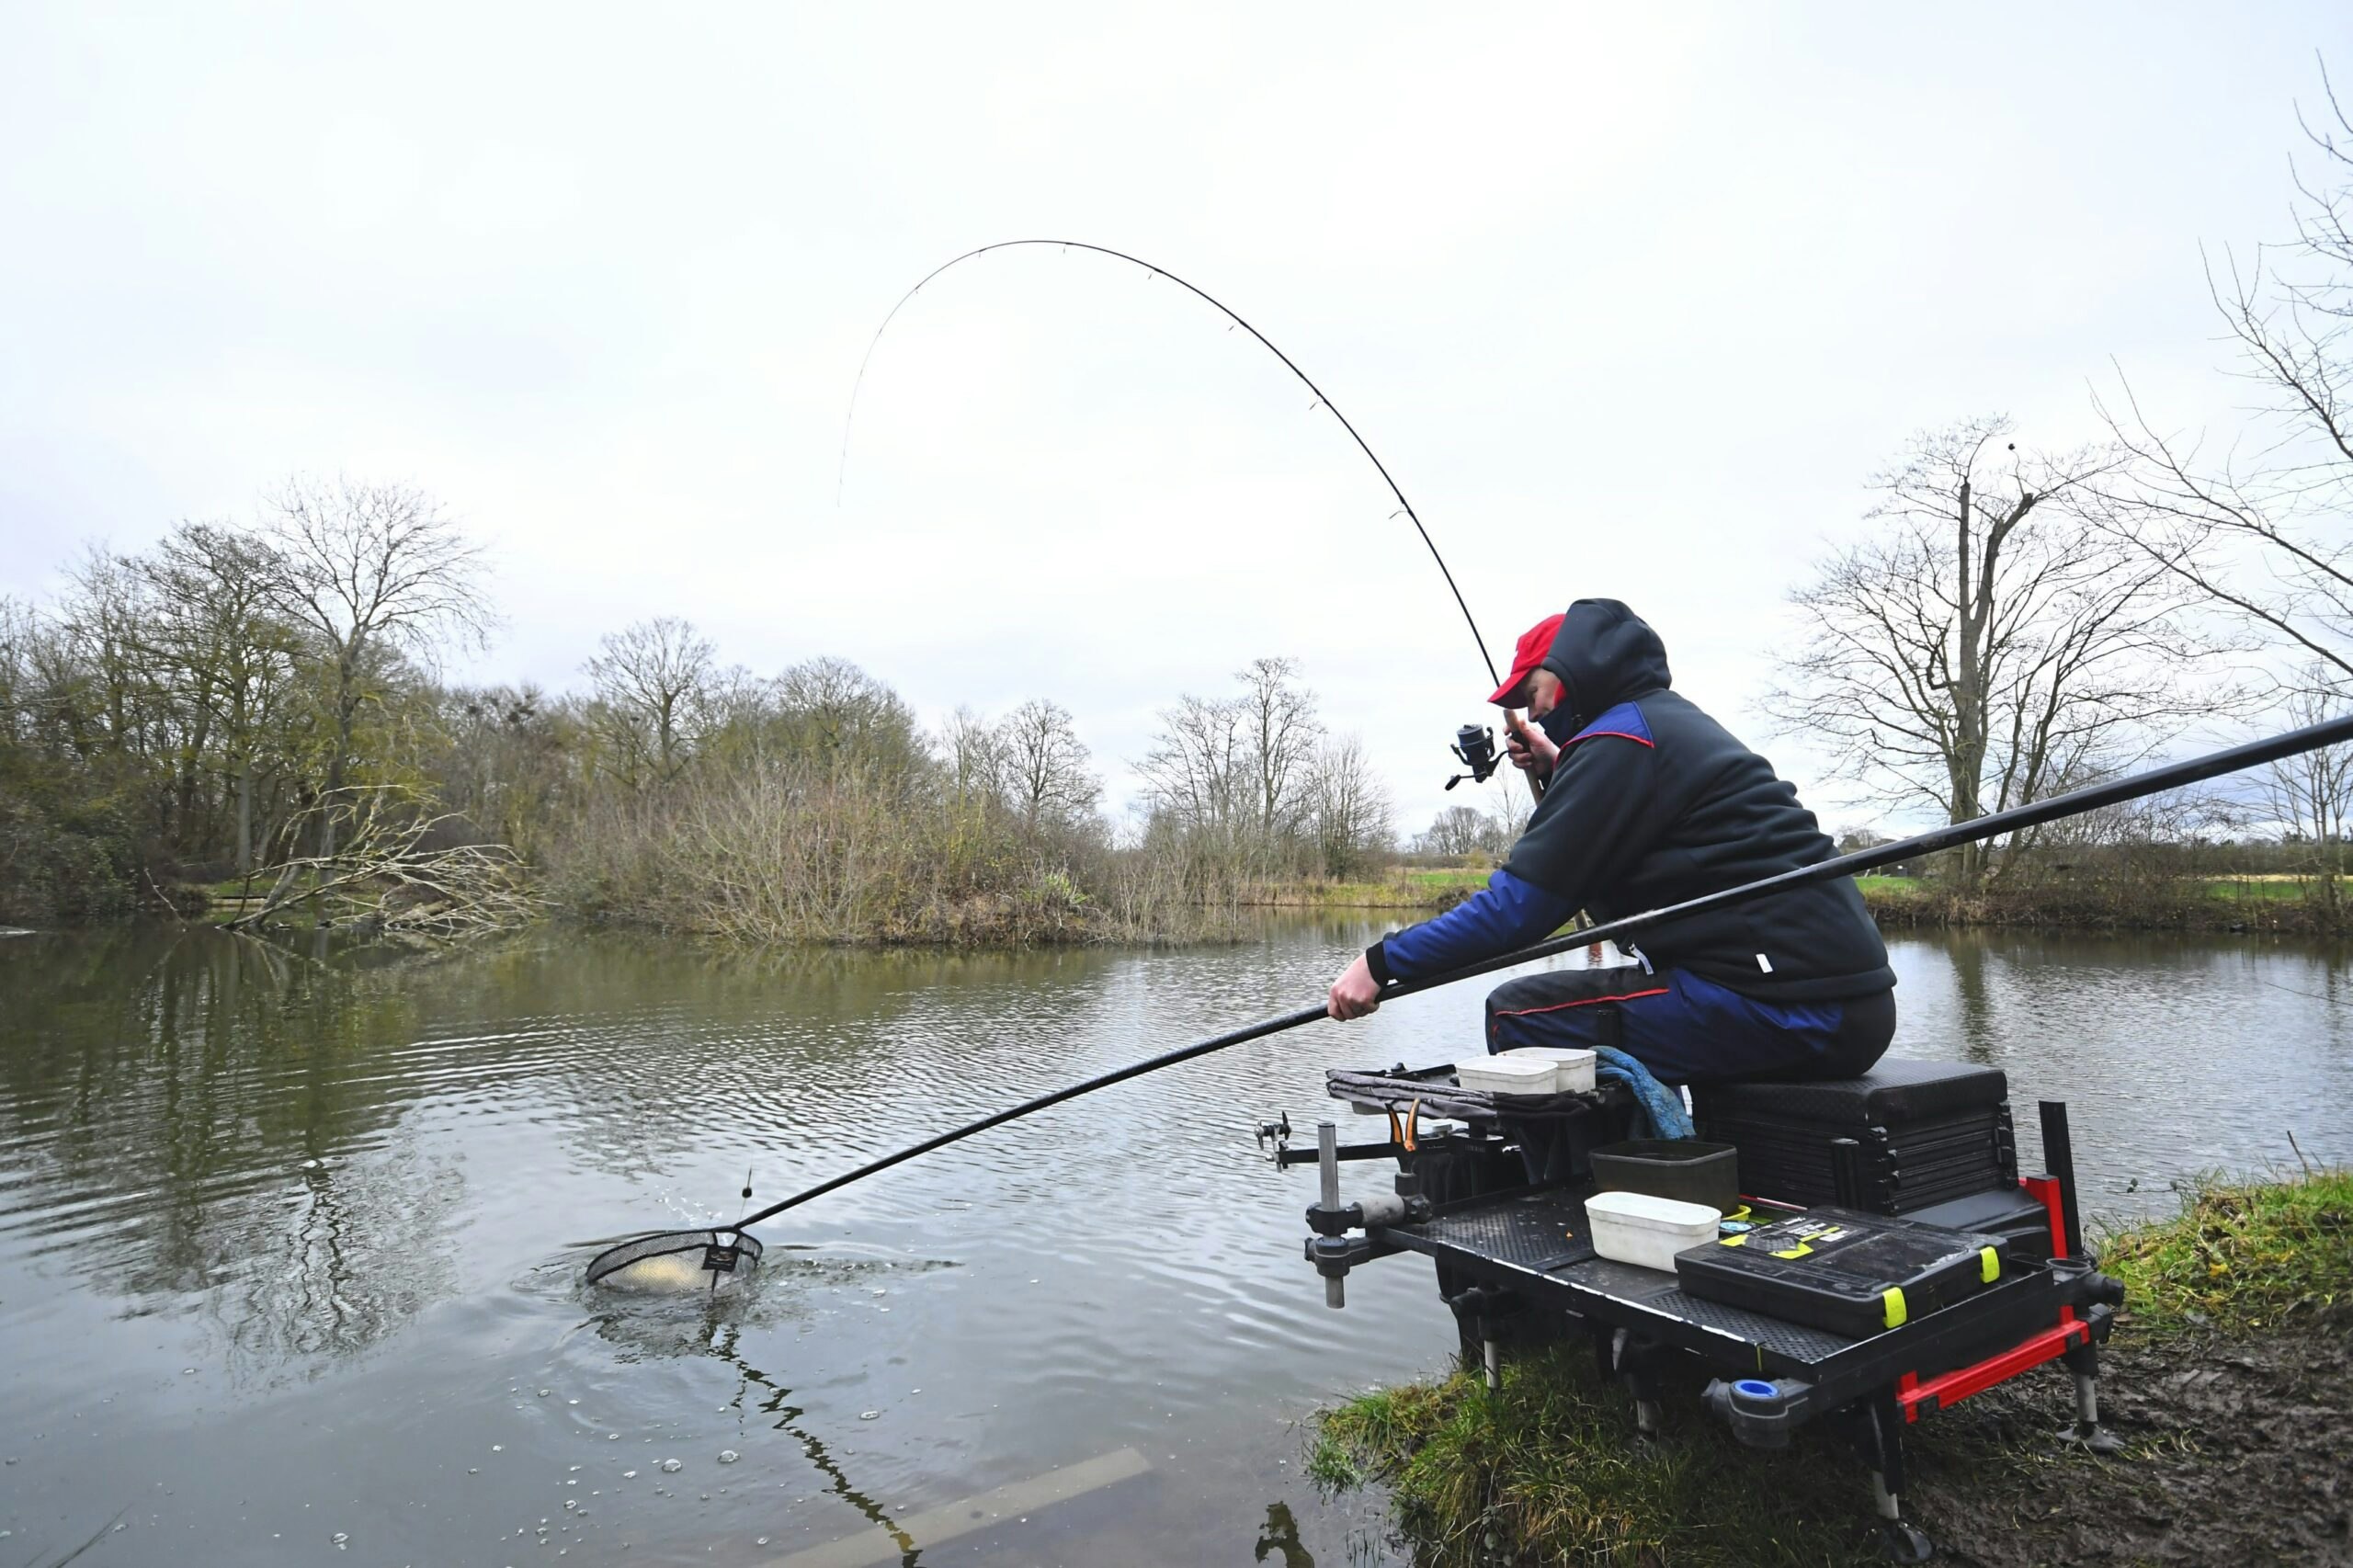 Expect 100lb bags of carp at Janson Fishery.